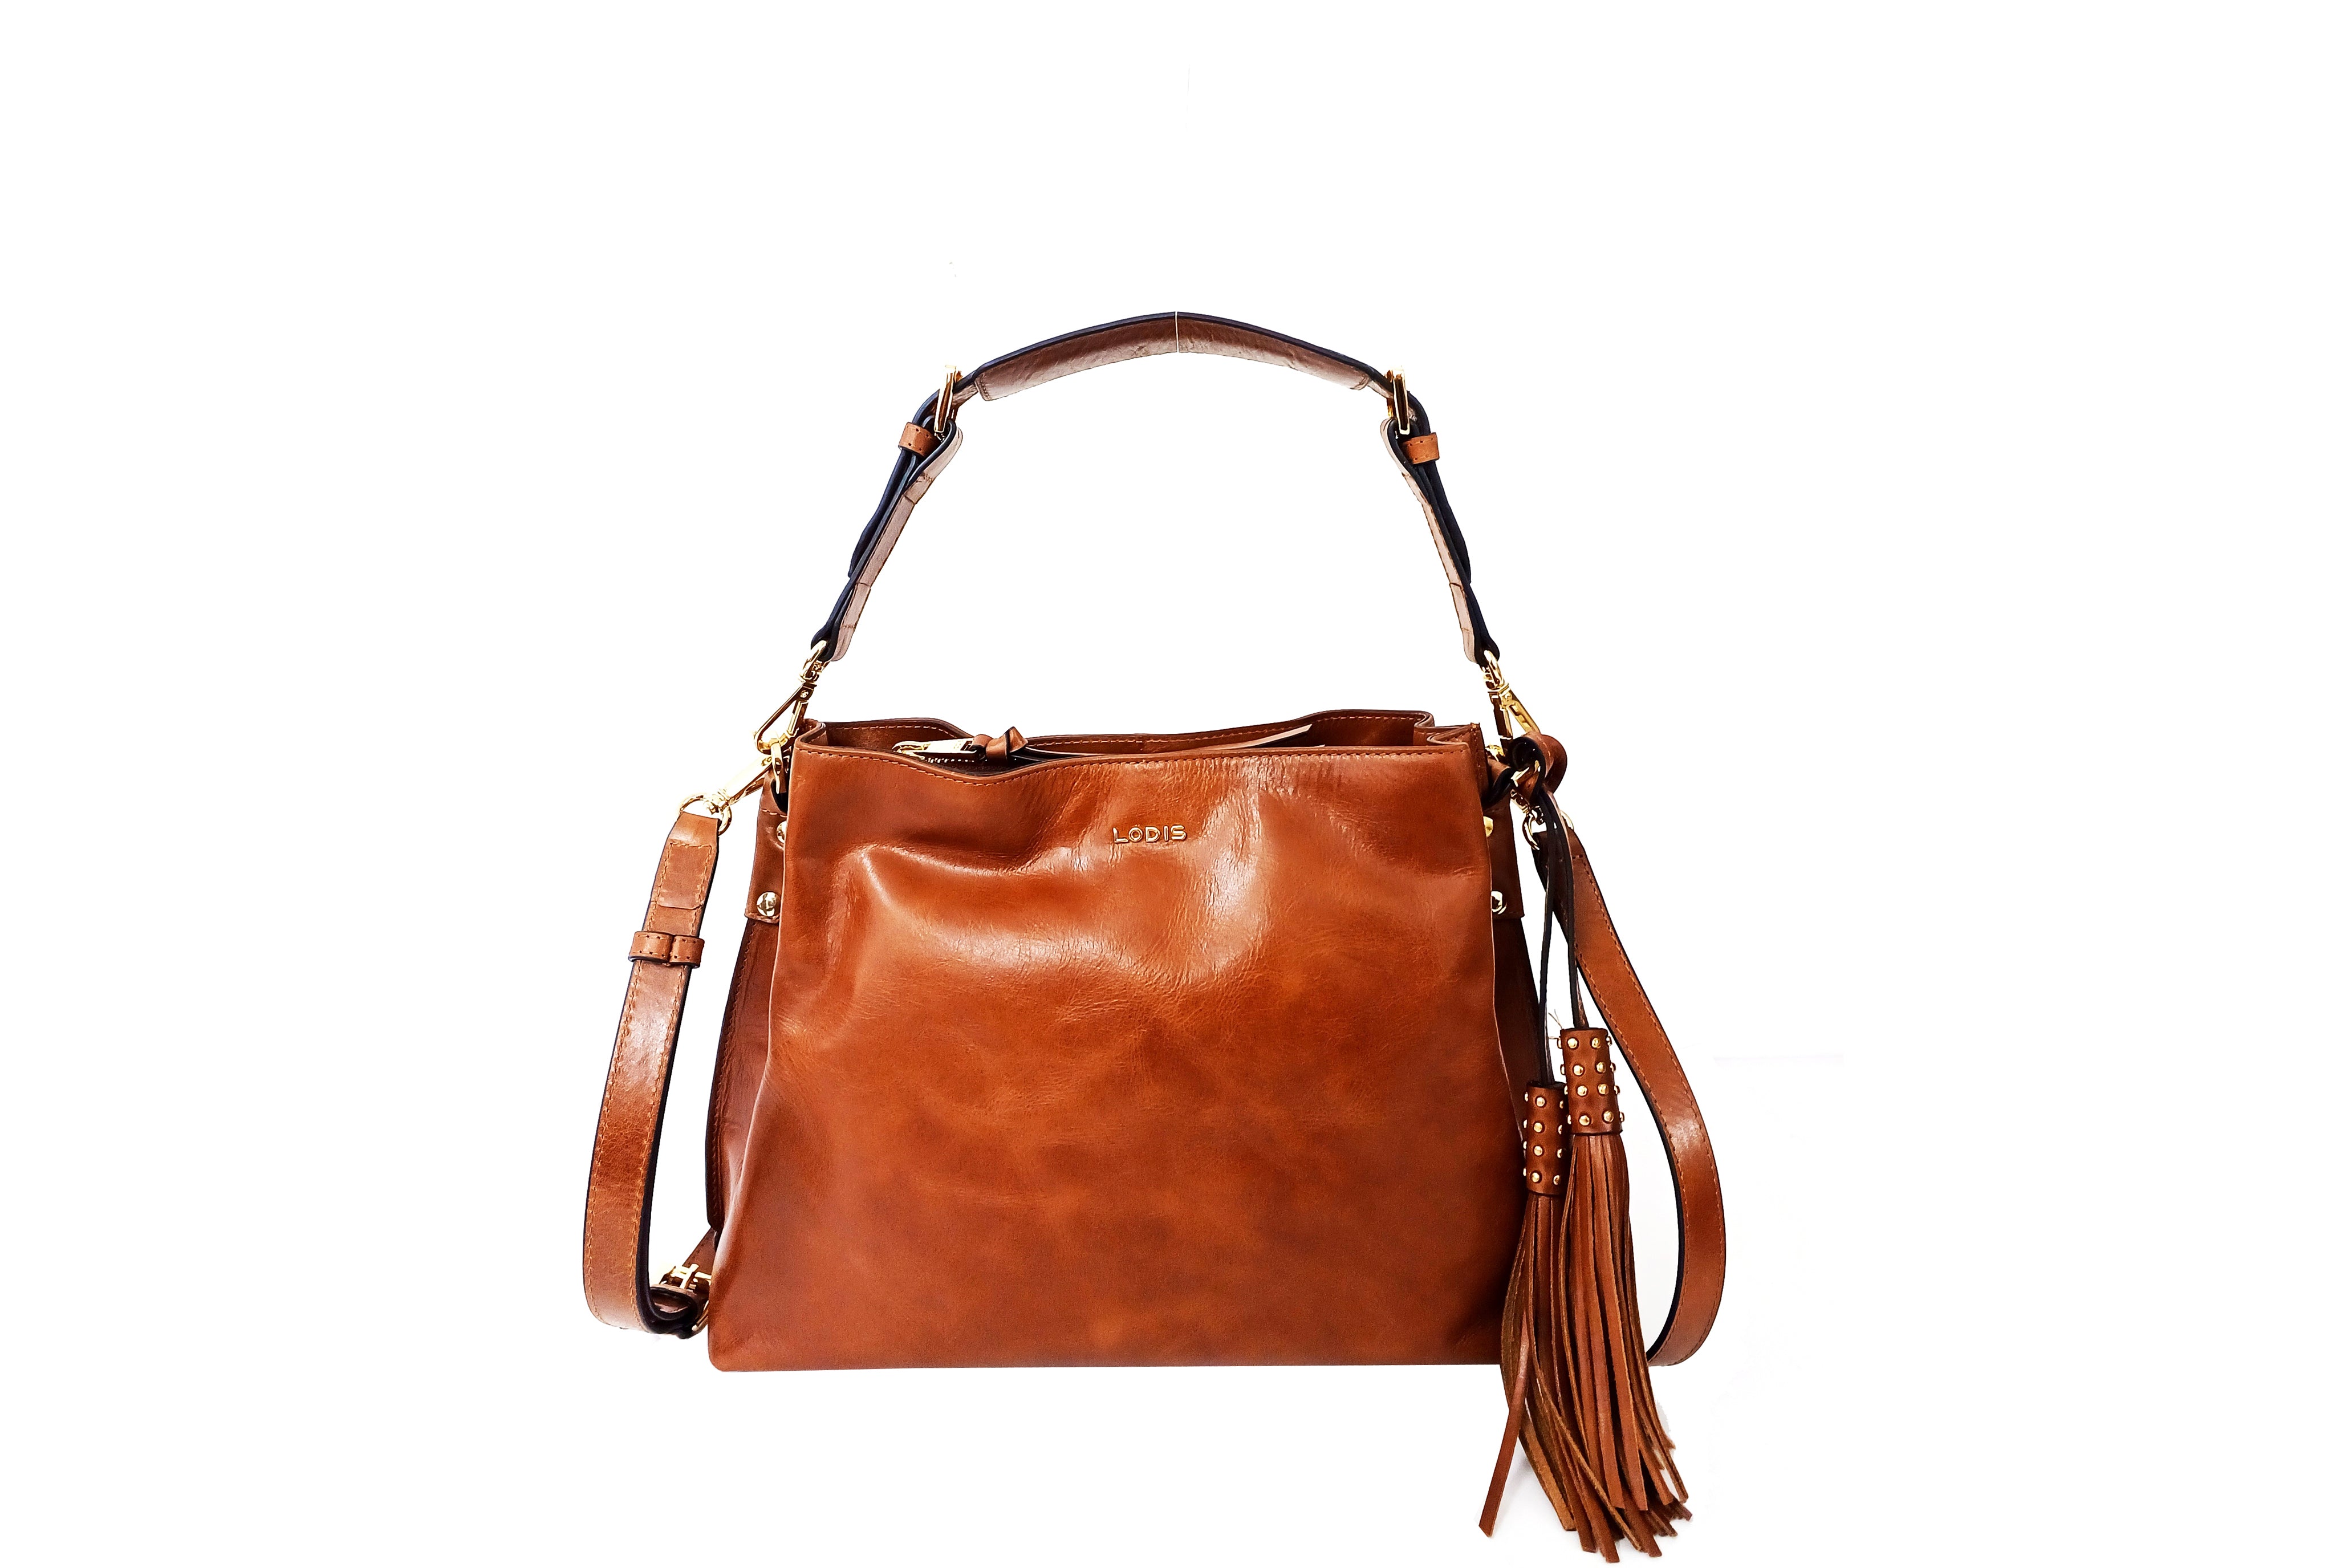 Shop Now The Luxurious Darcy Leather Bag | Lodis 